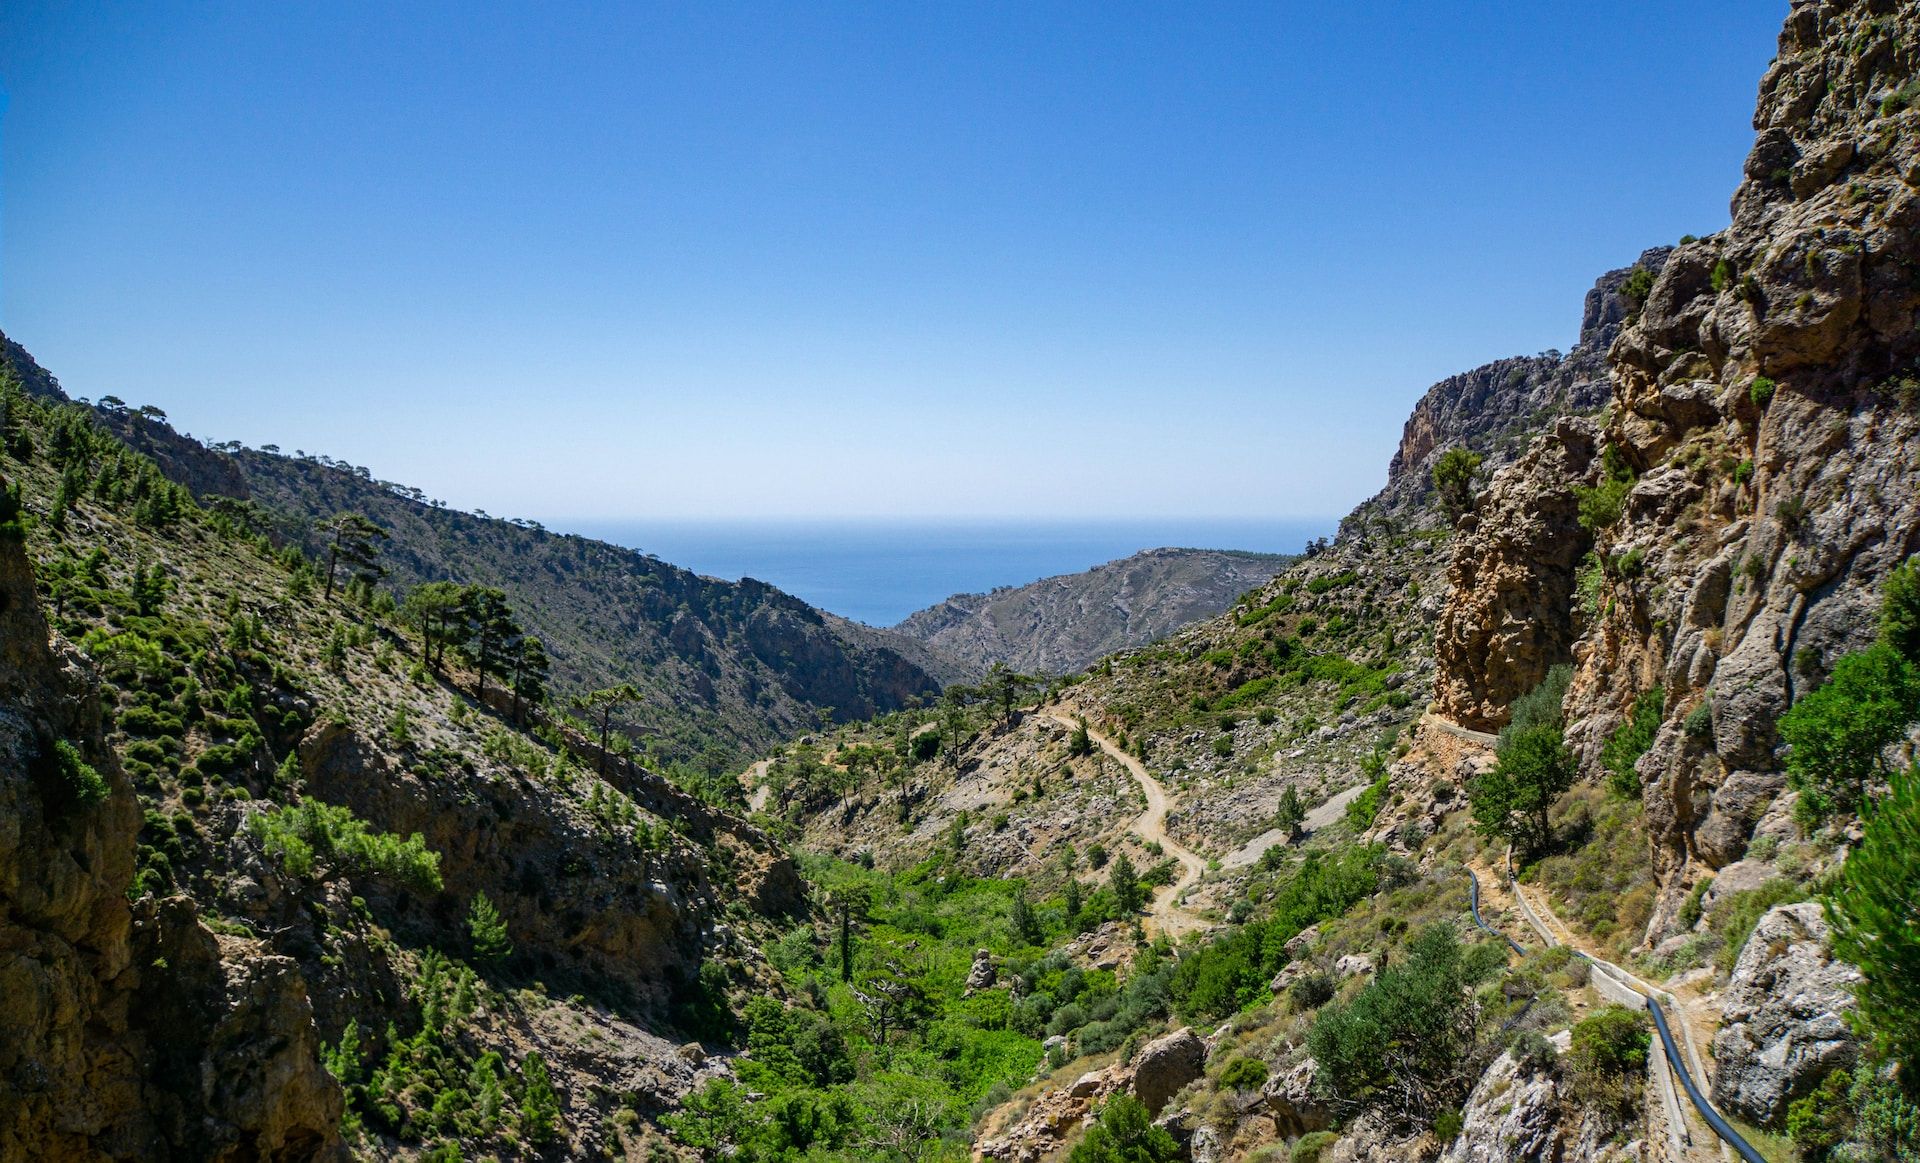 Mountains in Crete with a bright blue sky and a deep blue sea